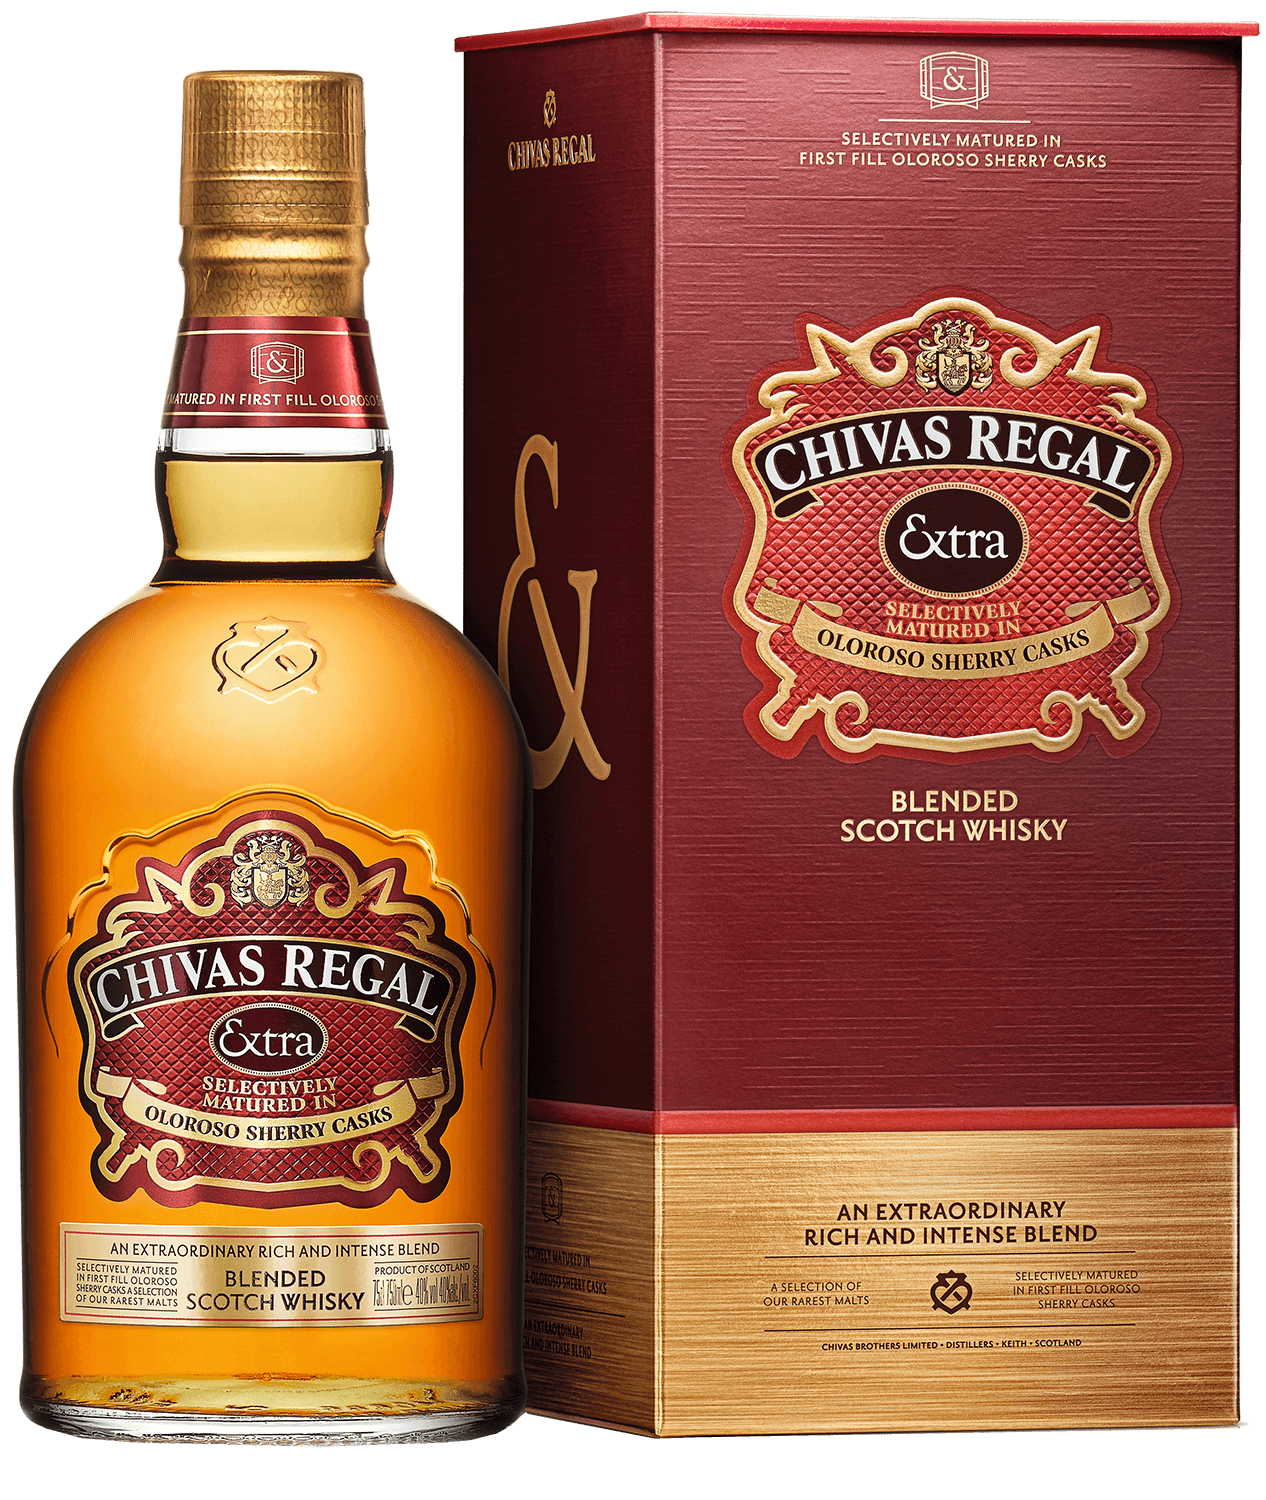 Chivas Regal Extra Blended Scotch Whisky (gift box) chivas regal extra blended scotch whisky gift box